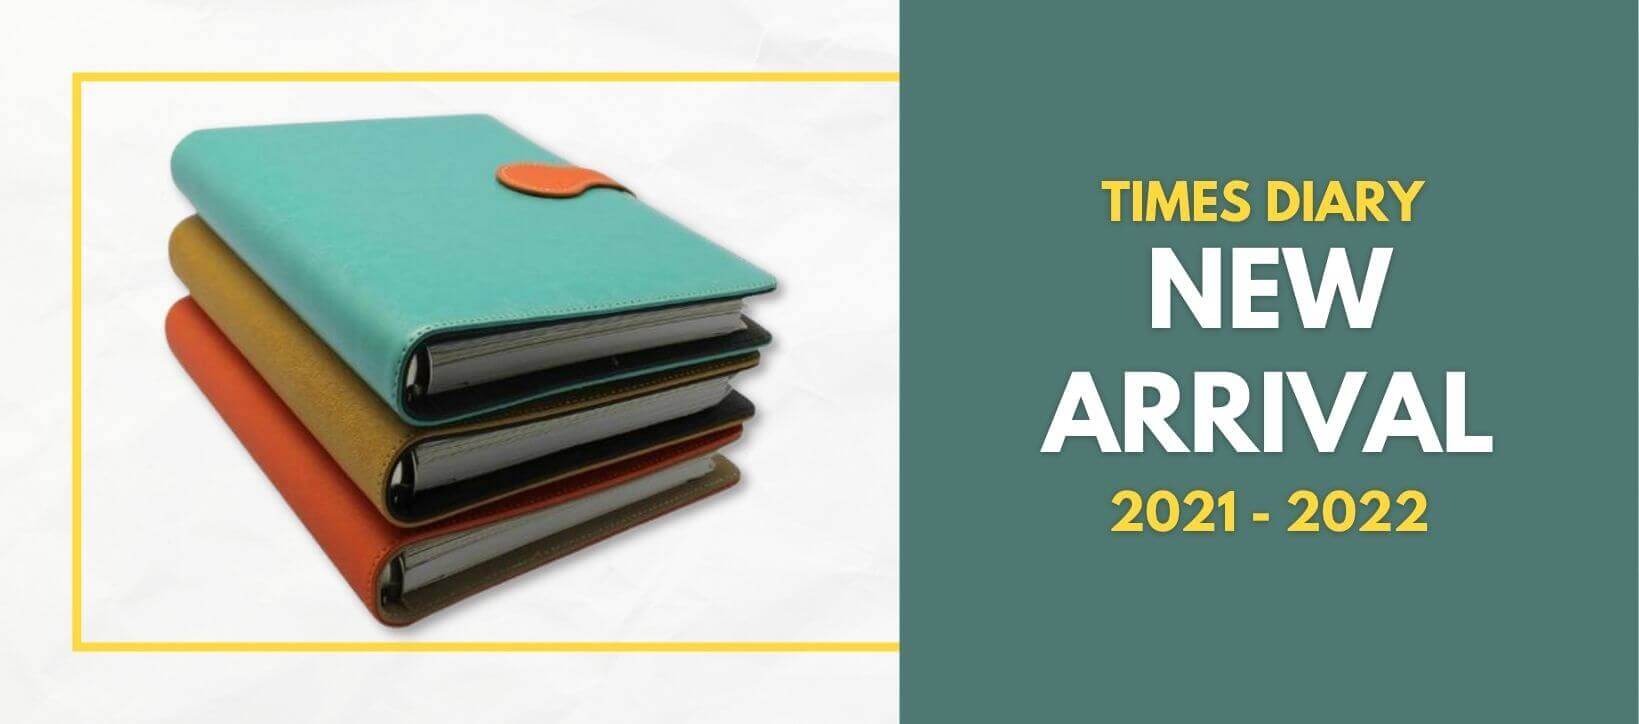 Times-diary-New-Arrival-2021-2022-(2)-(1)-(1)